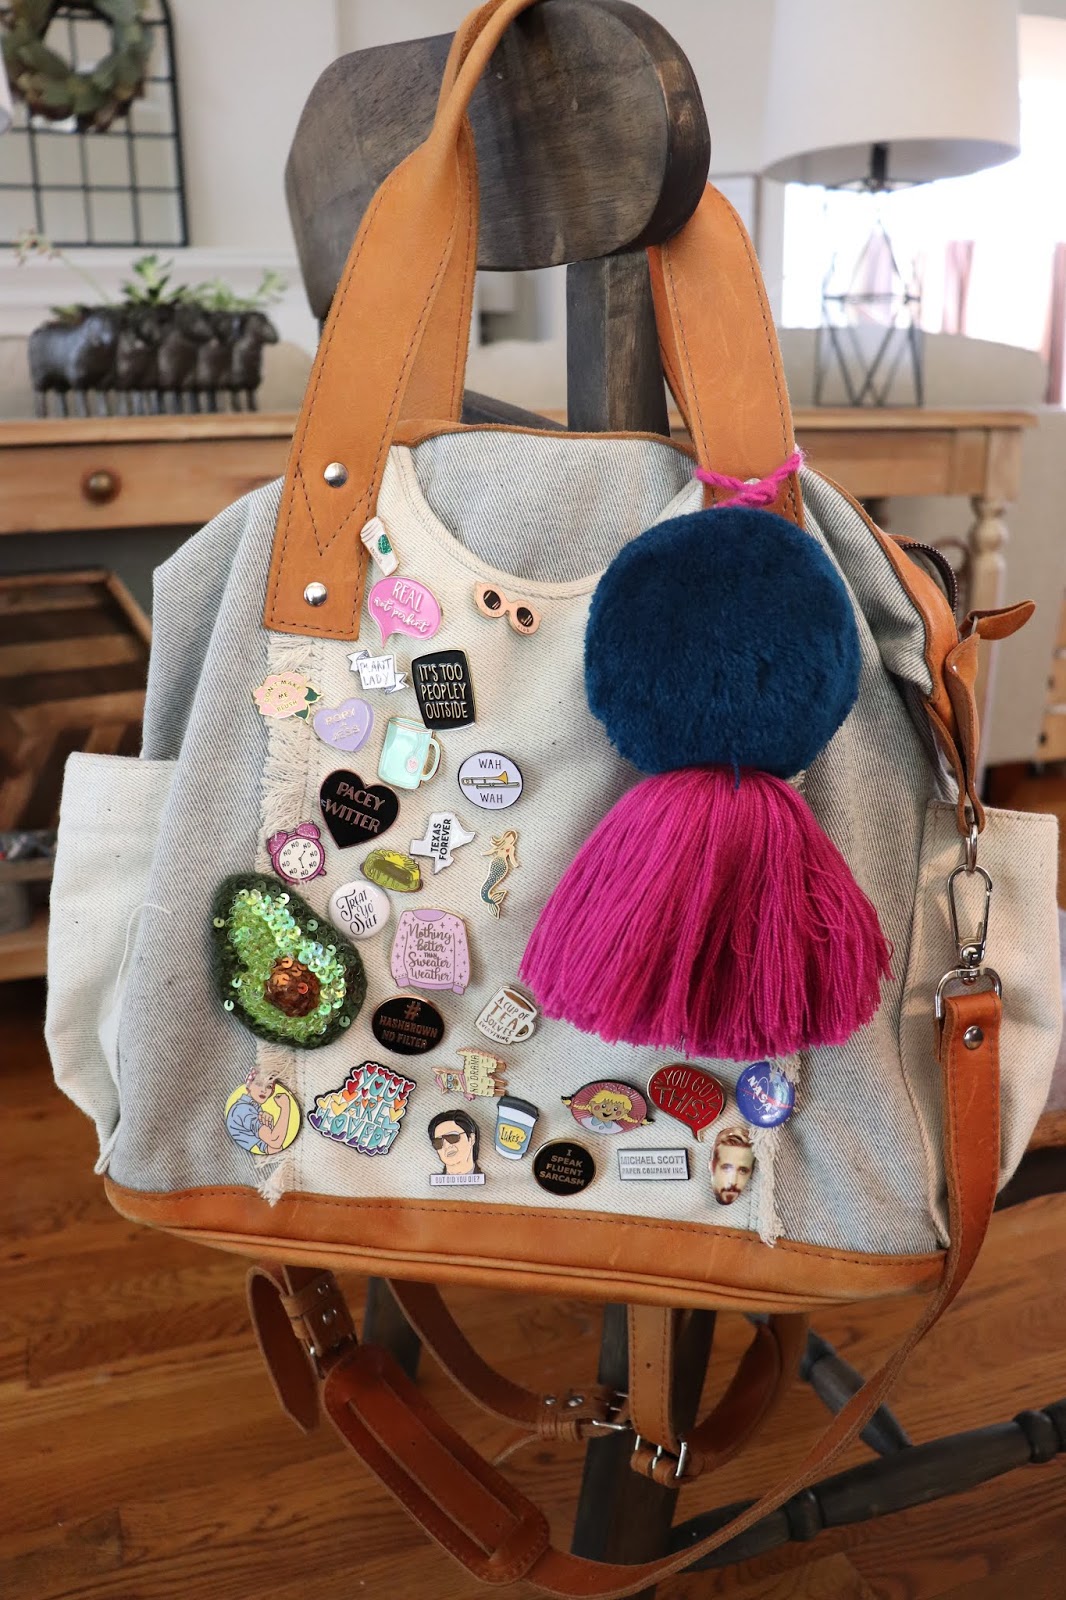 Pin on Bags and more bags